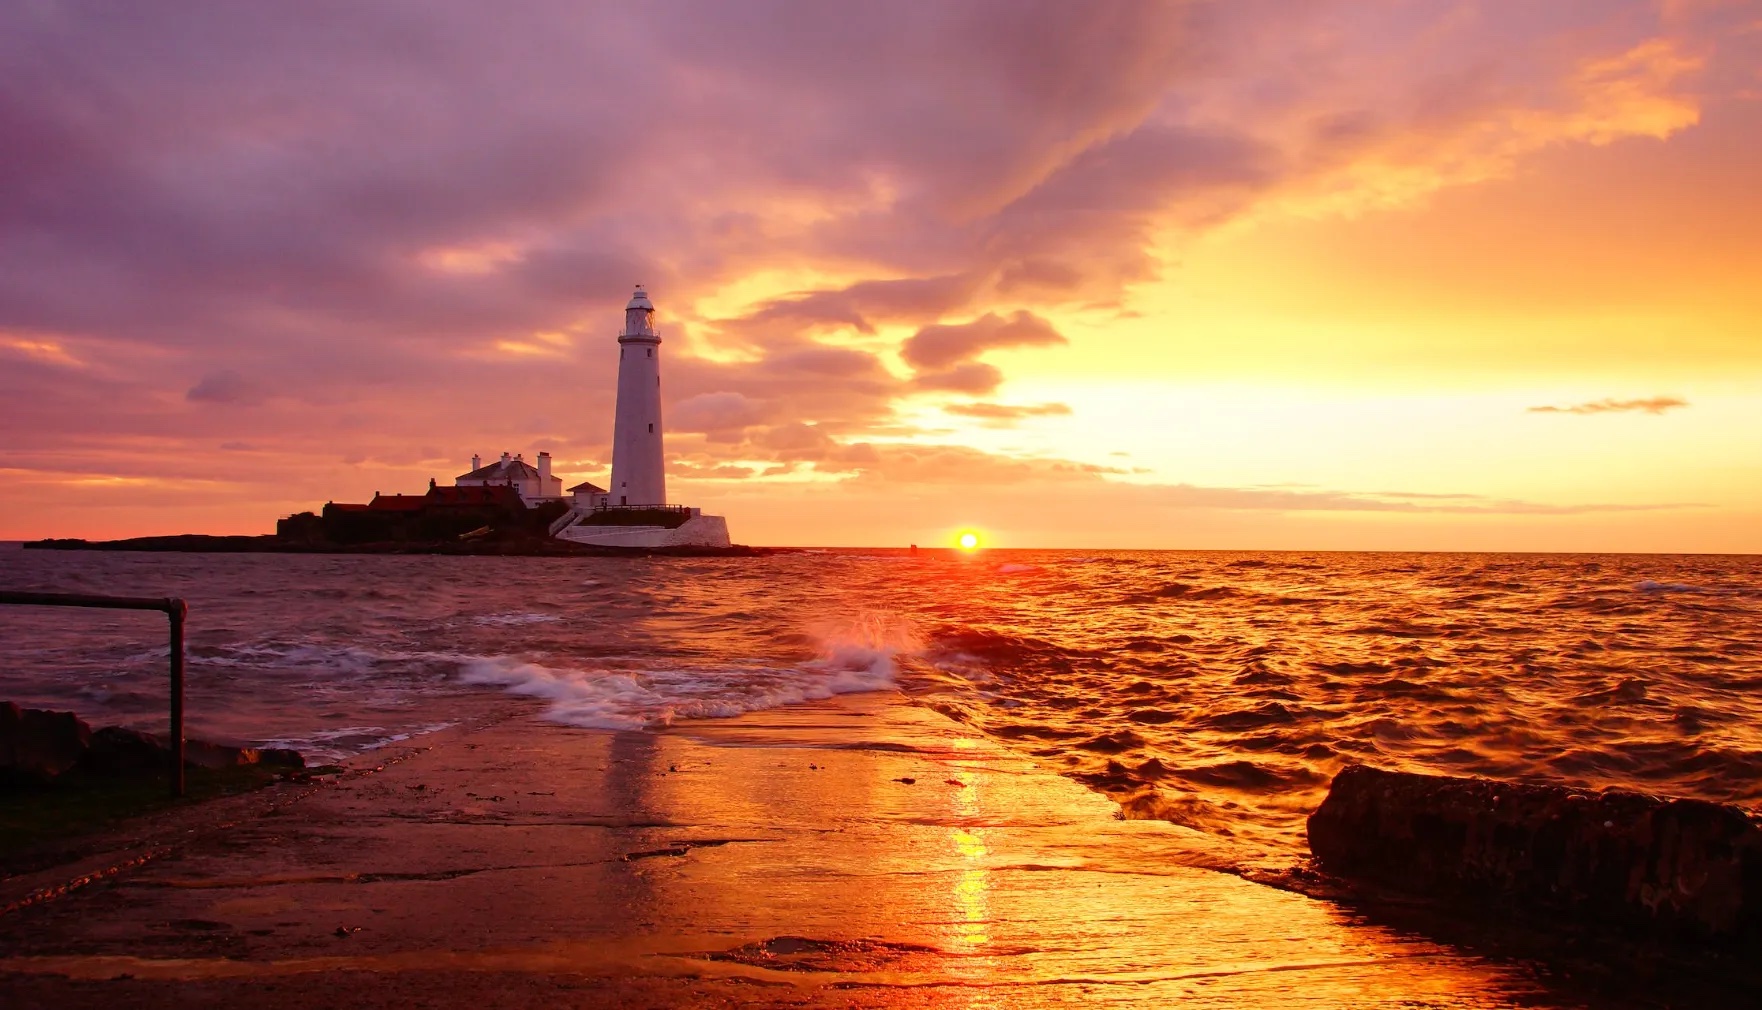 Lighthouse on the sea at sunset.